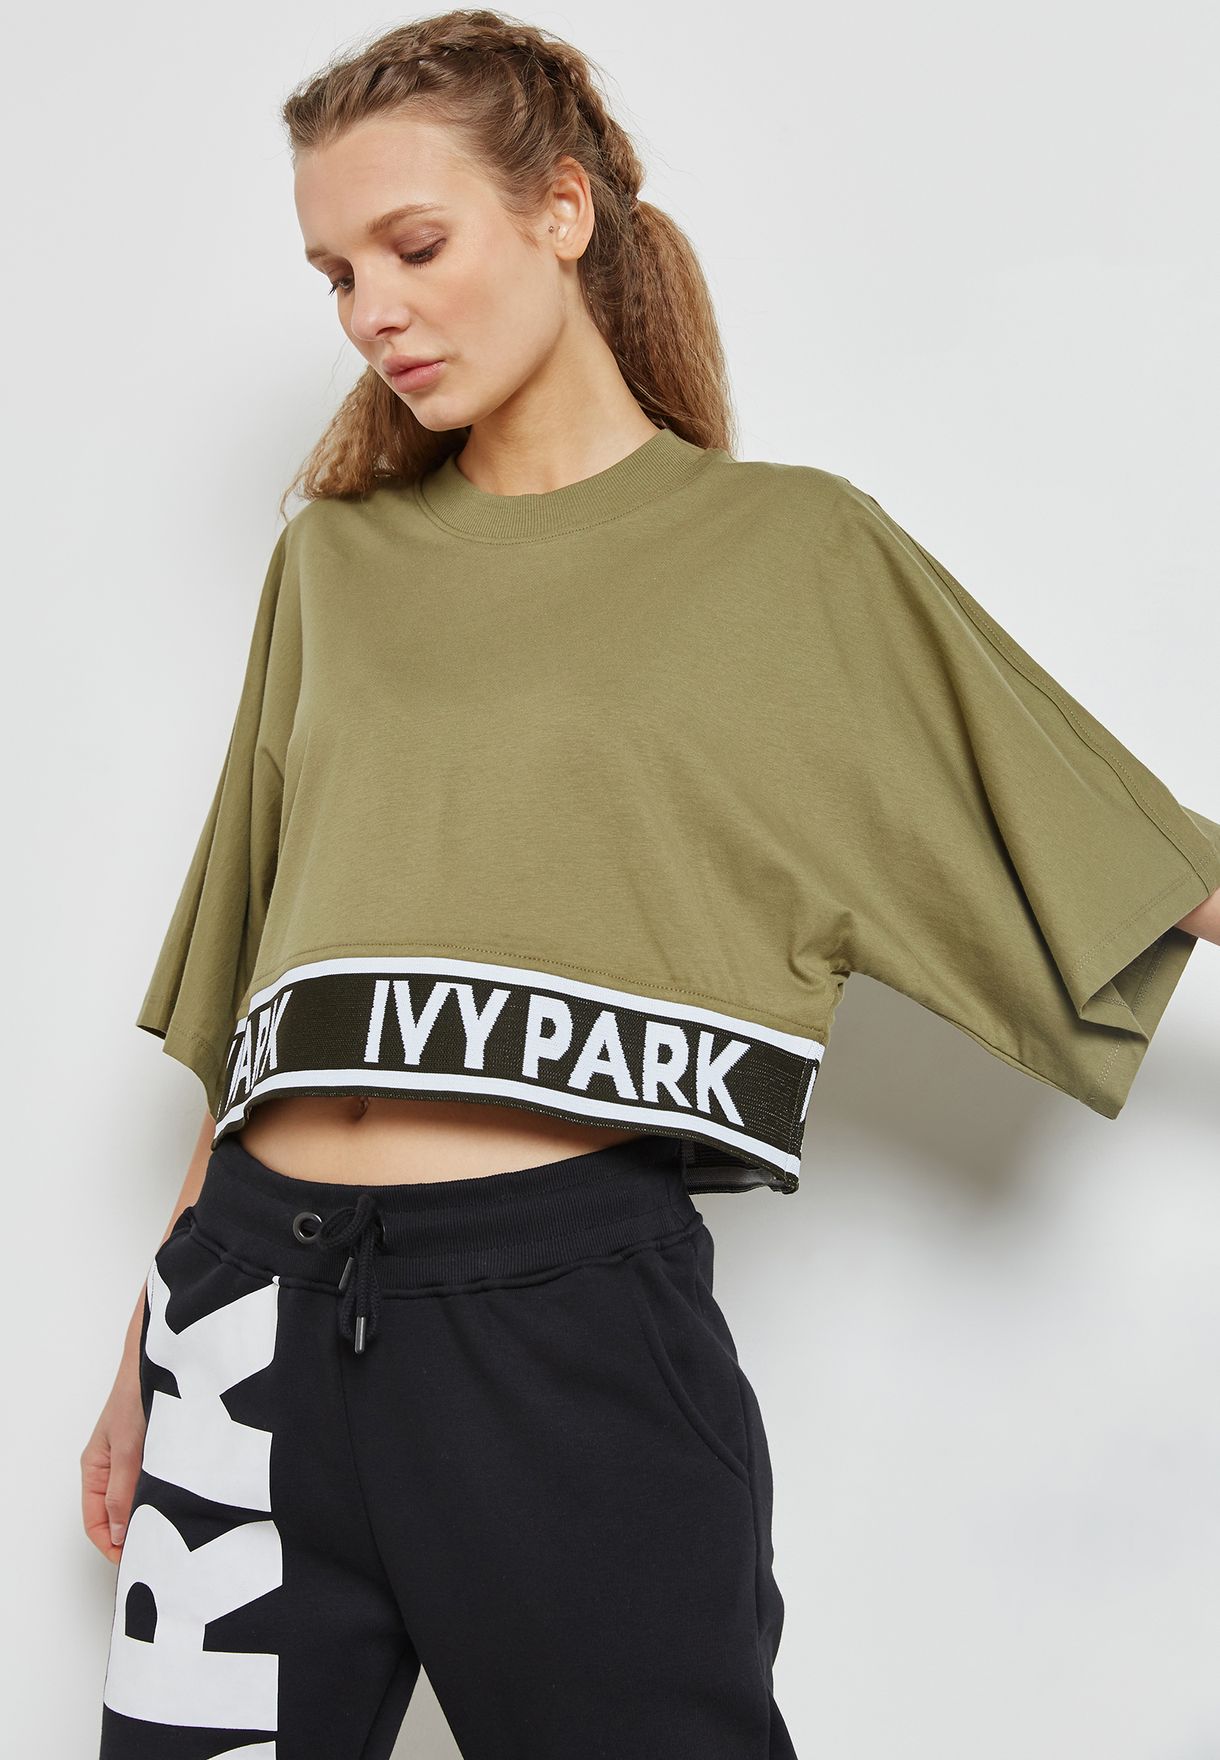 Buy > ivy park green t shirt > in stock